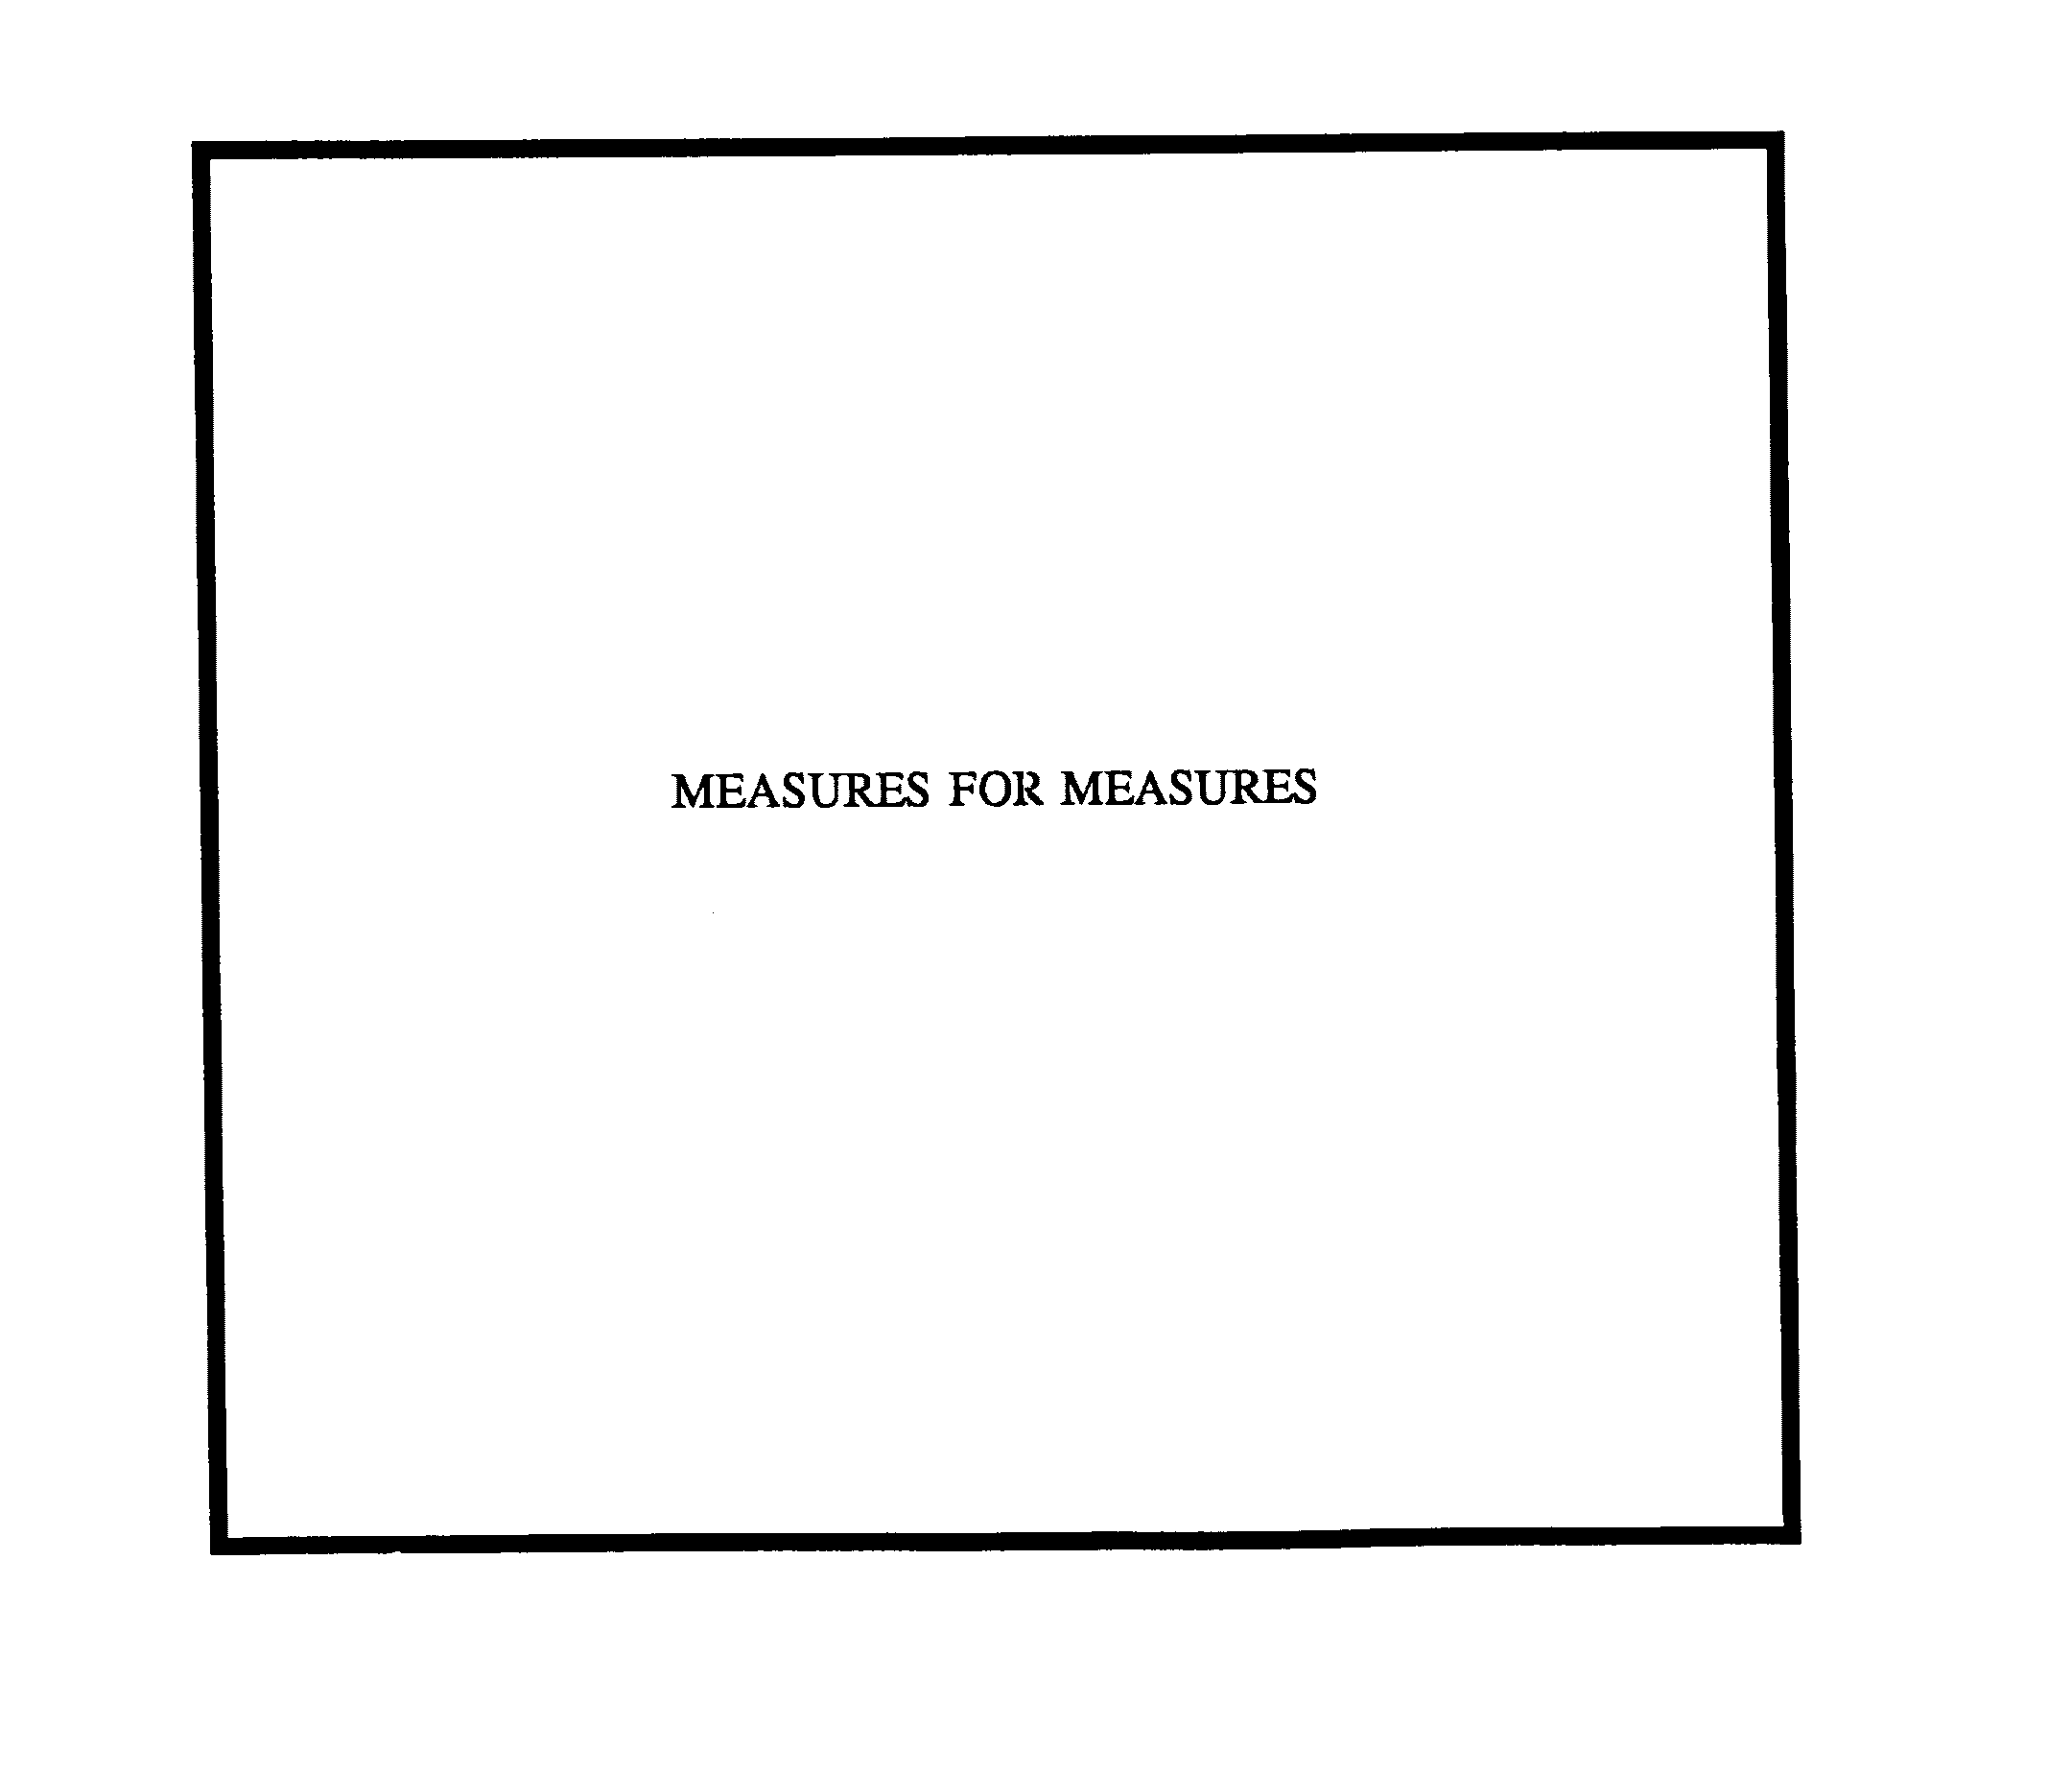  MEASURES FOR MEASURES